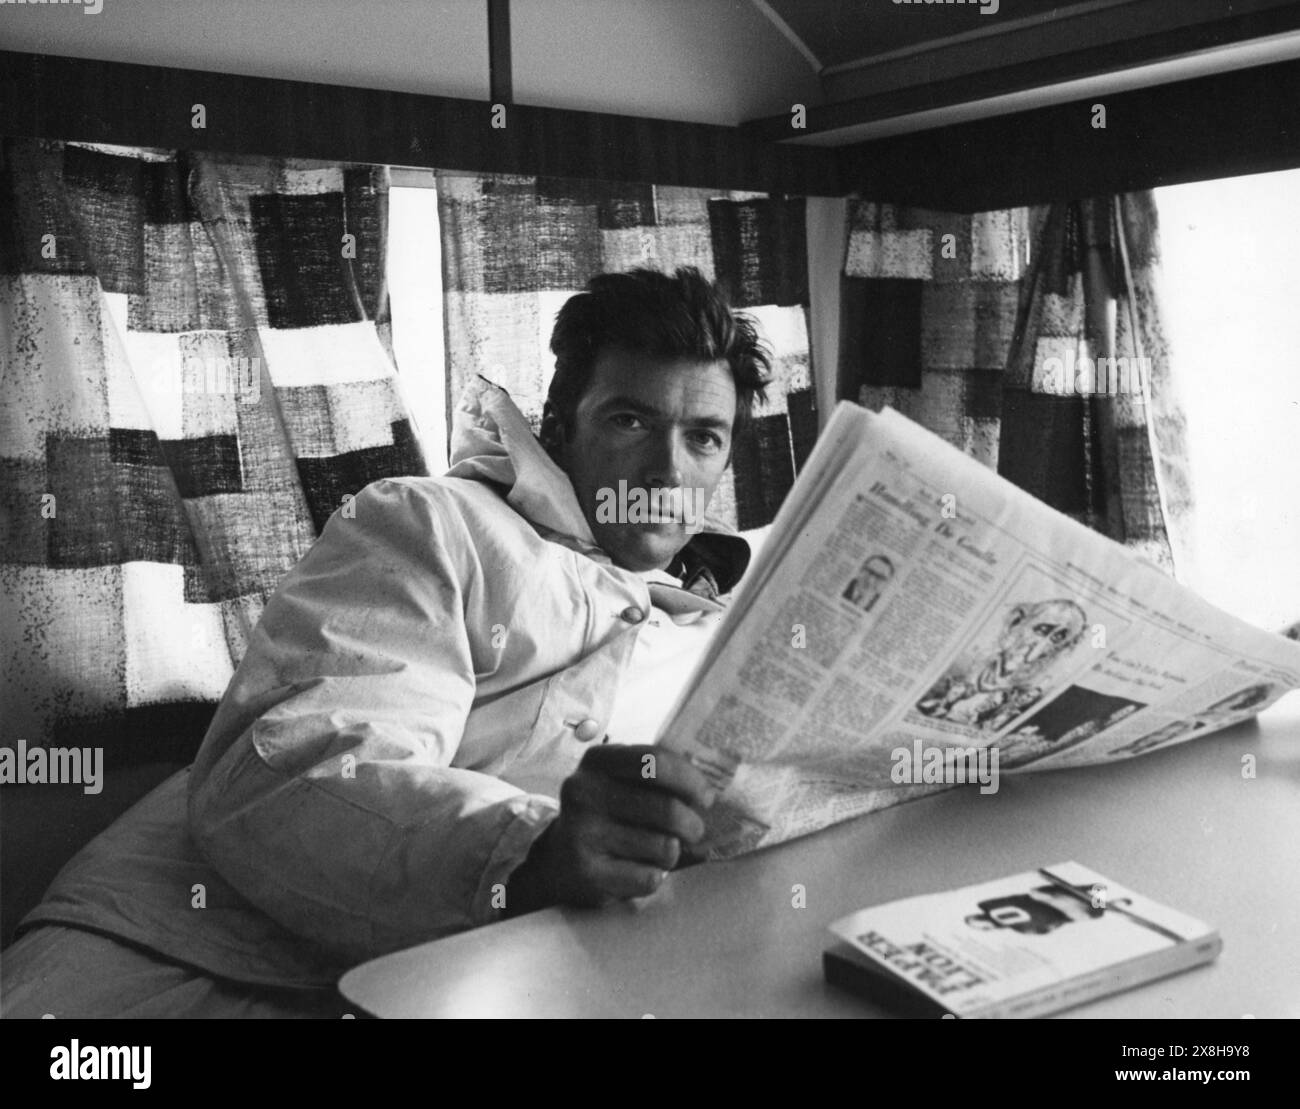 Candid Photo of CLINT EASTWOOD relaxing in a location trailer on the set of WHERE EAGLES DARE 1968 Director BRIAN G. HUTTON Story and Screenplay ALISTAIR MacLEAN Music RON GOODWIN  Gershwin-Kastner Productions / Winkast Film Productions / Metro Goldwyn Mayer Stock Photo